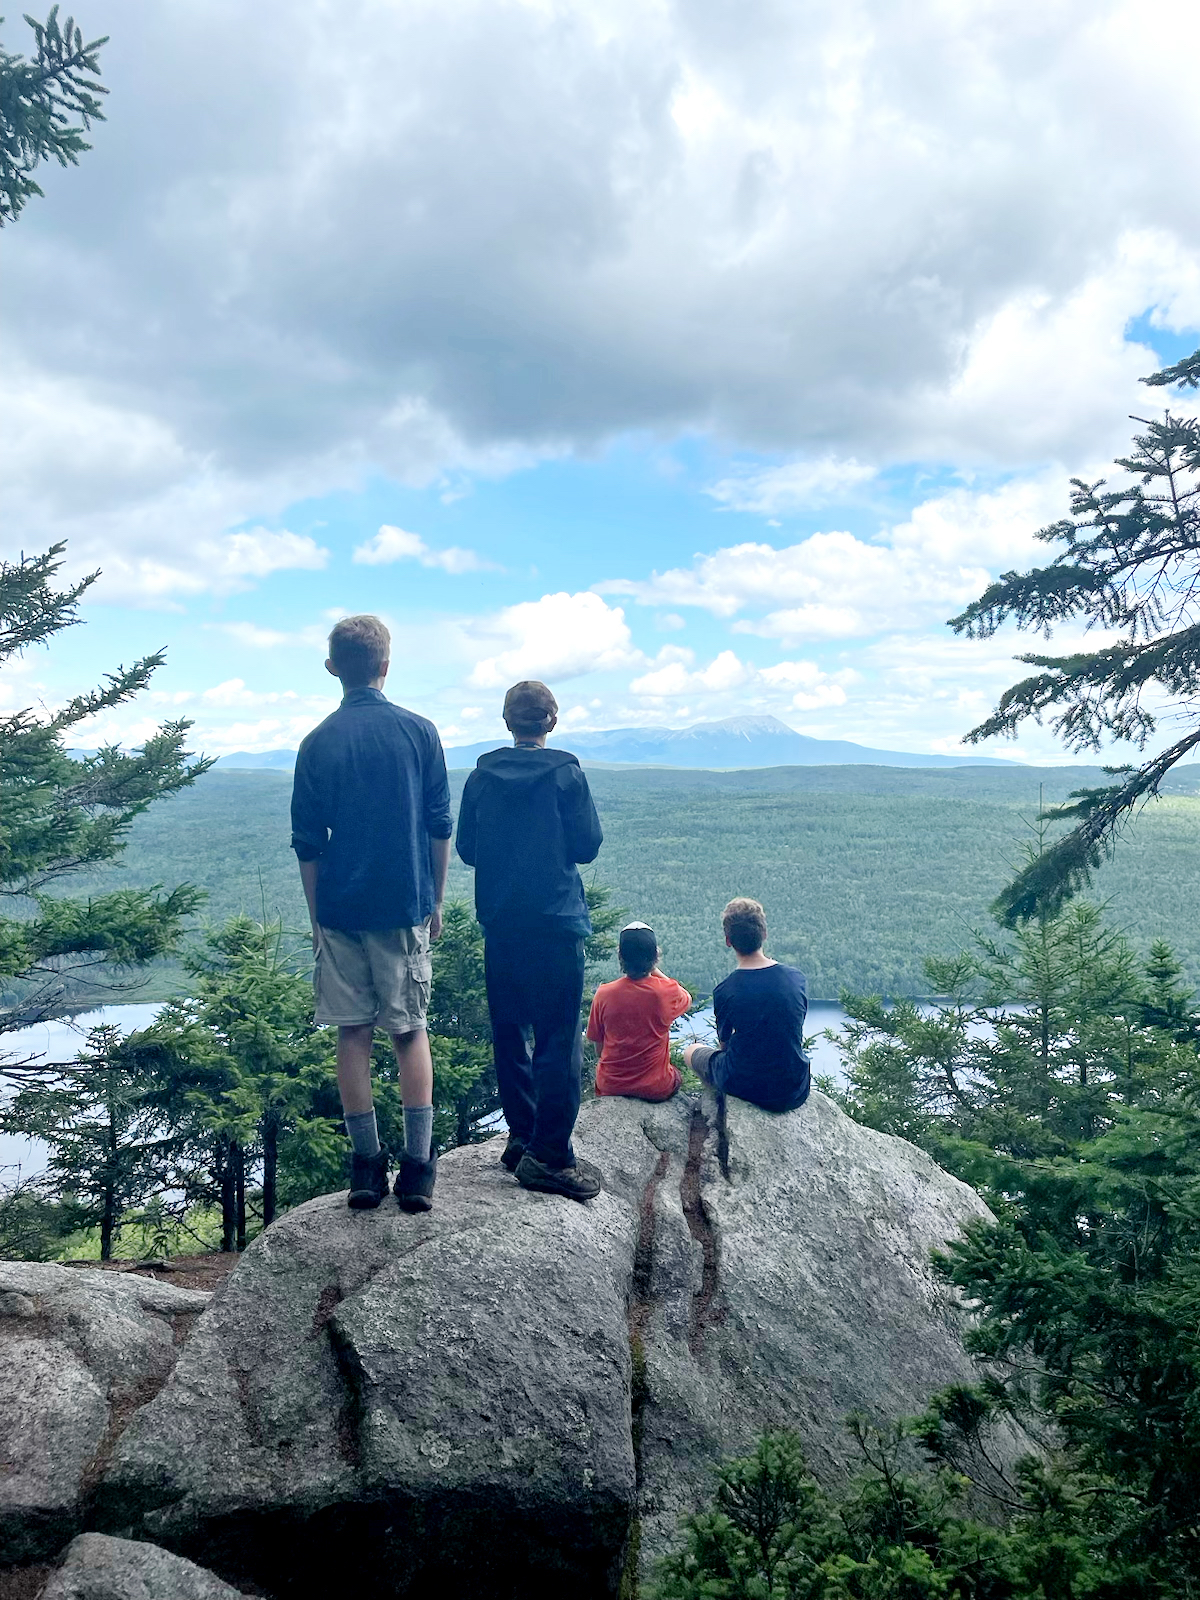 featured image for UMaine Extension 4-H at Tanglewood announces full scholarship opportunity for youth to attend summer camp or explore the Appalachian Trail